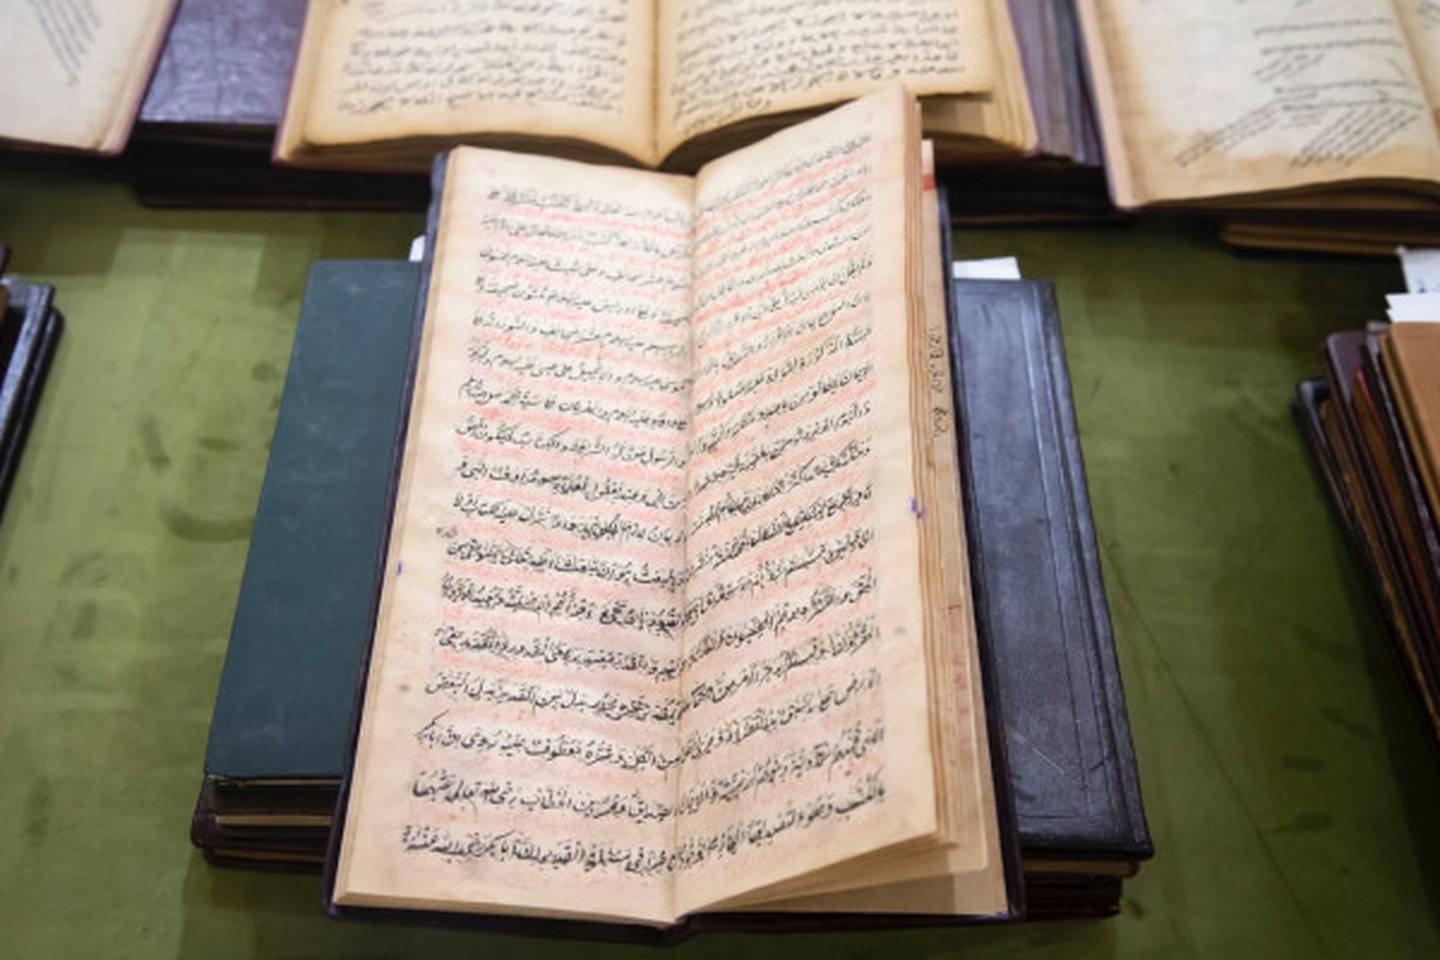 Sheikh Dr Sultan bin Muhammad Al Qasimi is a collector of historical manuscripts.  The image depicts a set of manuscripts he donated to Al Qasimia University's House of Islamic Manuscripts, to be studied by scholars and scholars.  Photo: W.A.M.